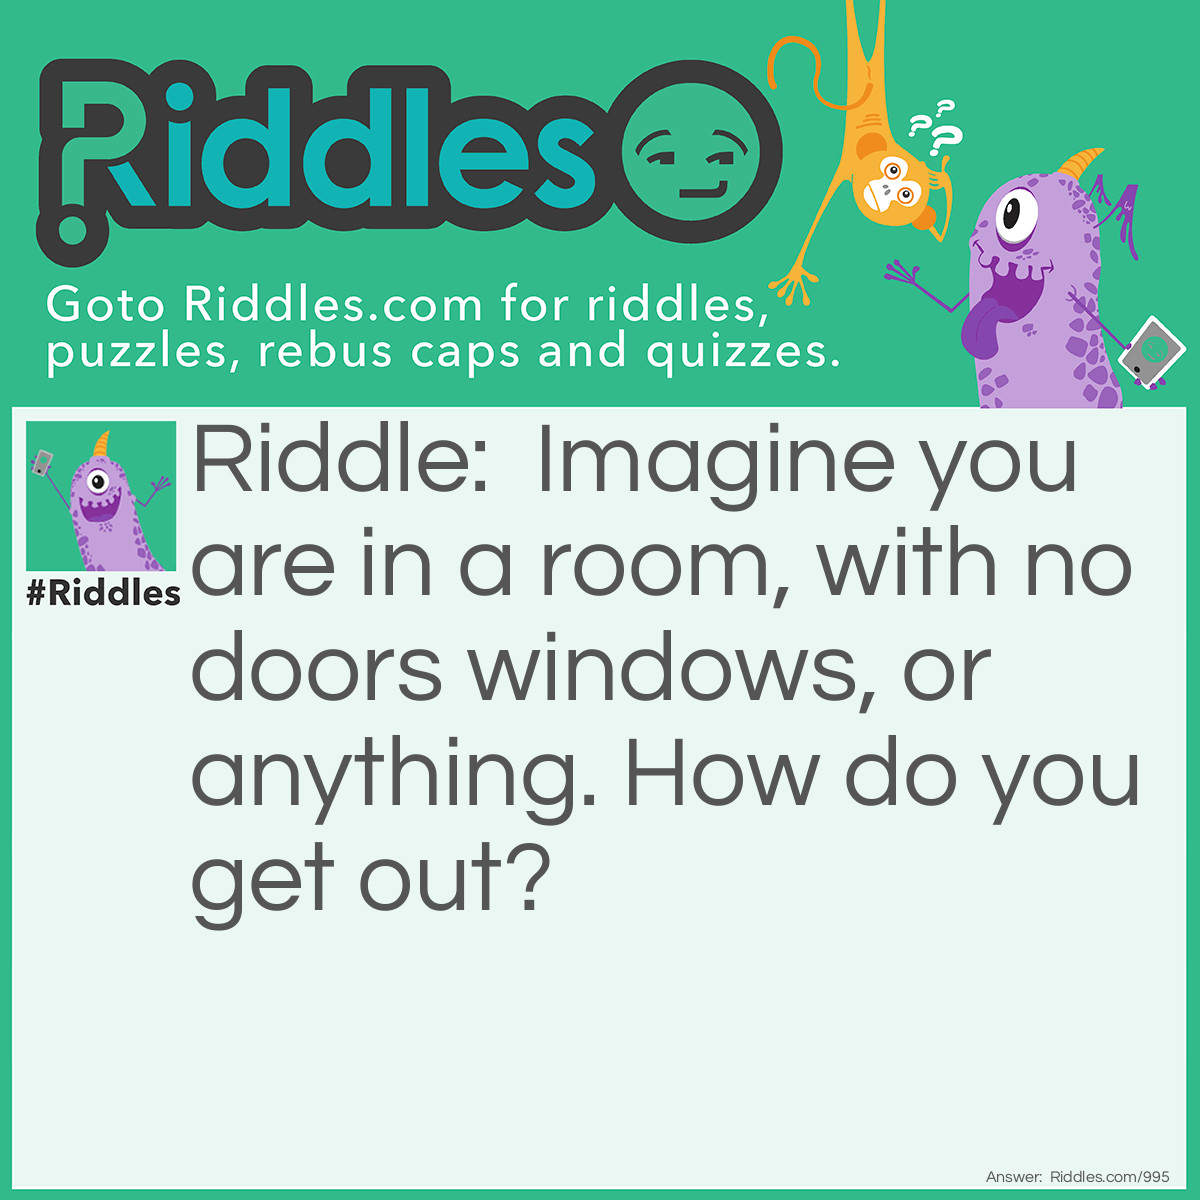 Riddle: Imagine you are in a room, no doors windows or anything, how do you get out? Answer: Stop imagining.